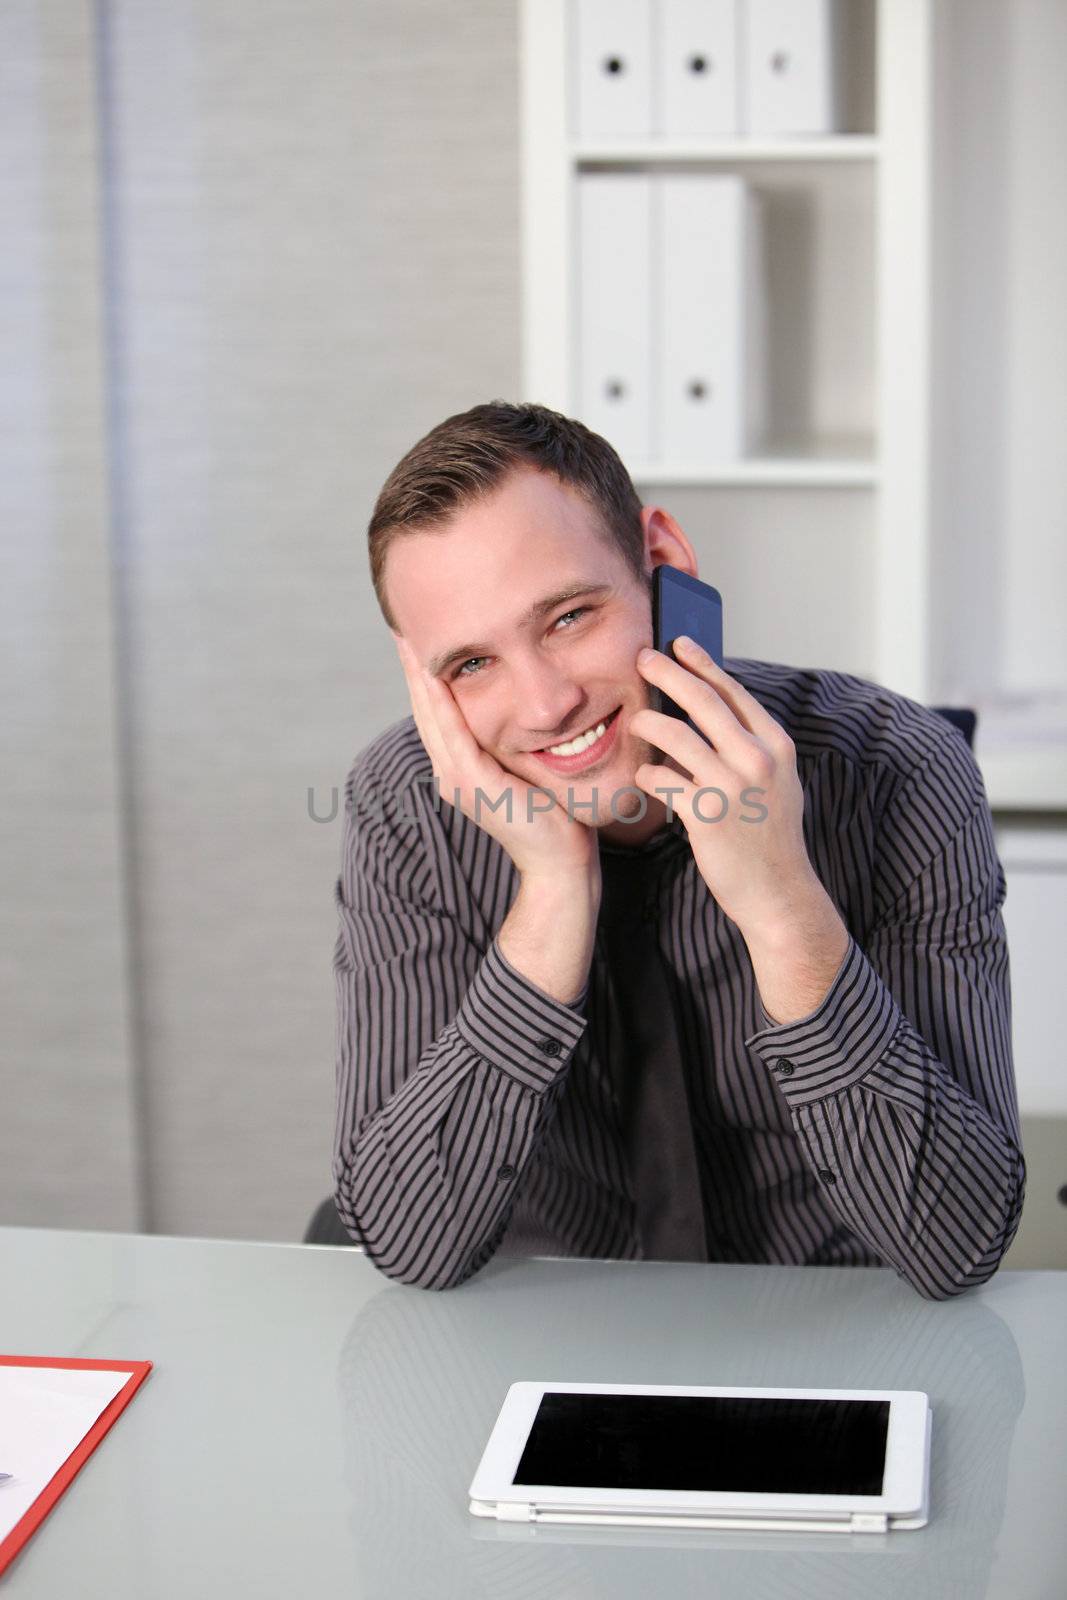 Handsome young business man using a mobile while seated at his desk as he looks up to smile at the camera